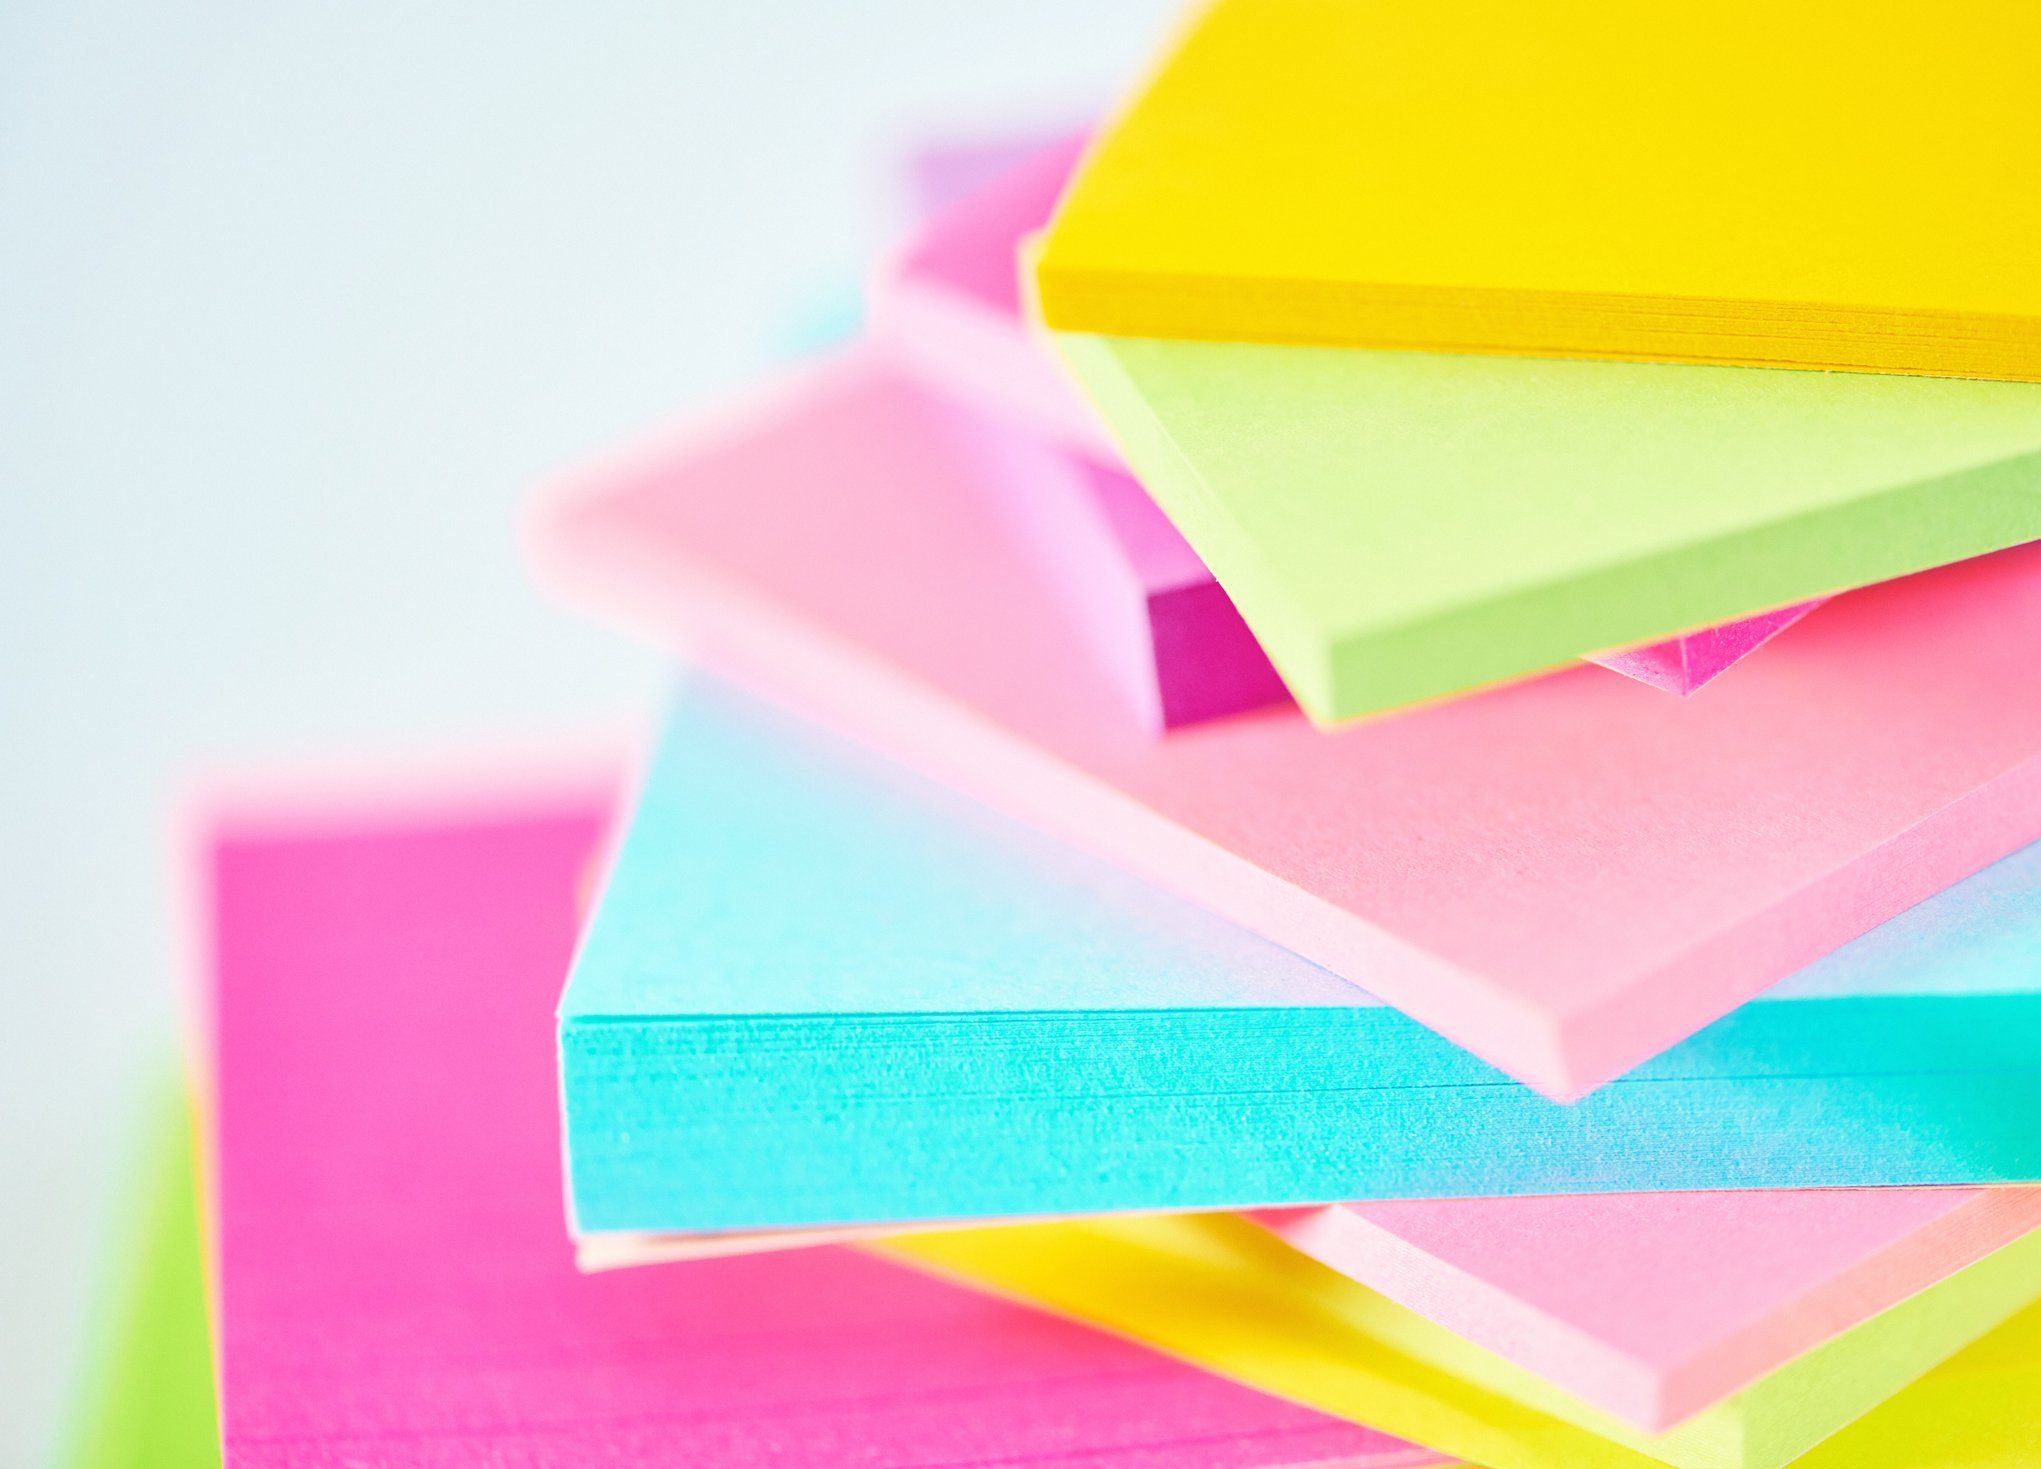 Abstract macro shot of a collection of colored sticky notes